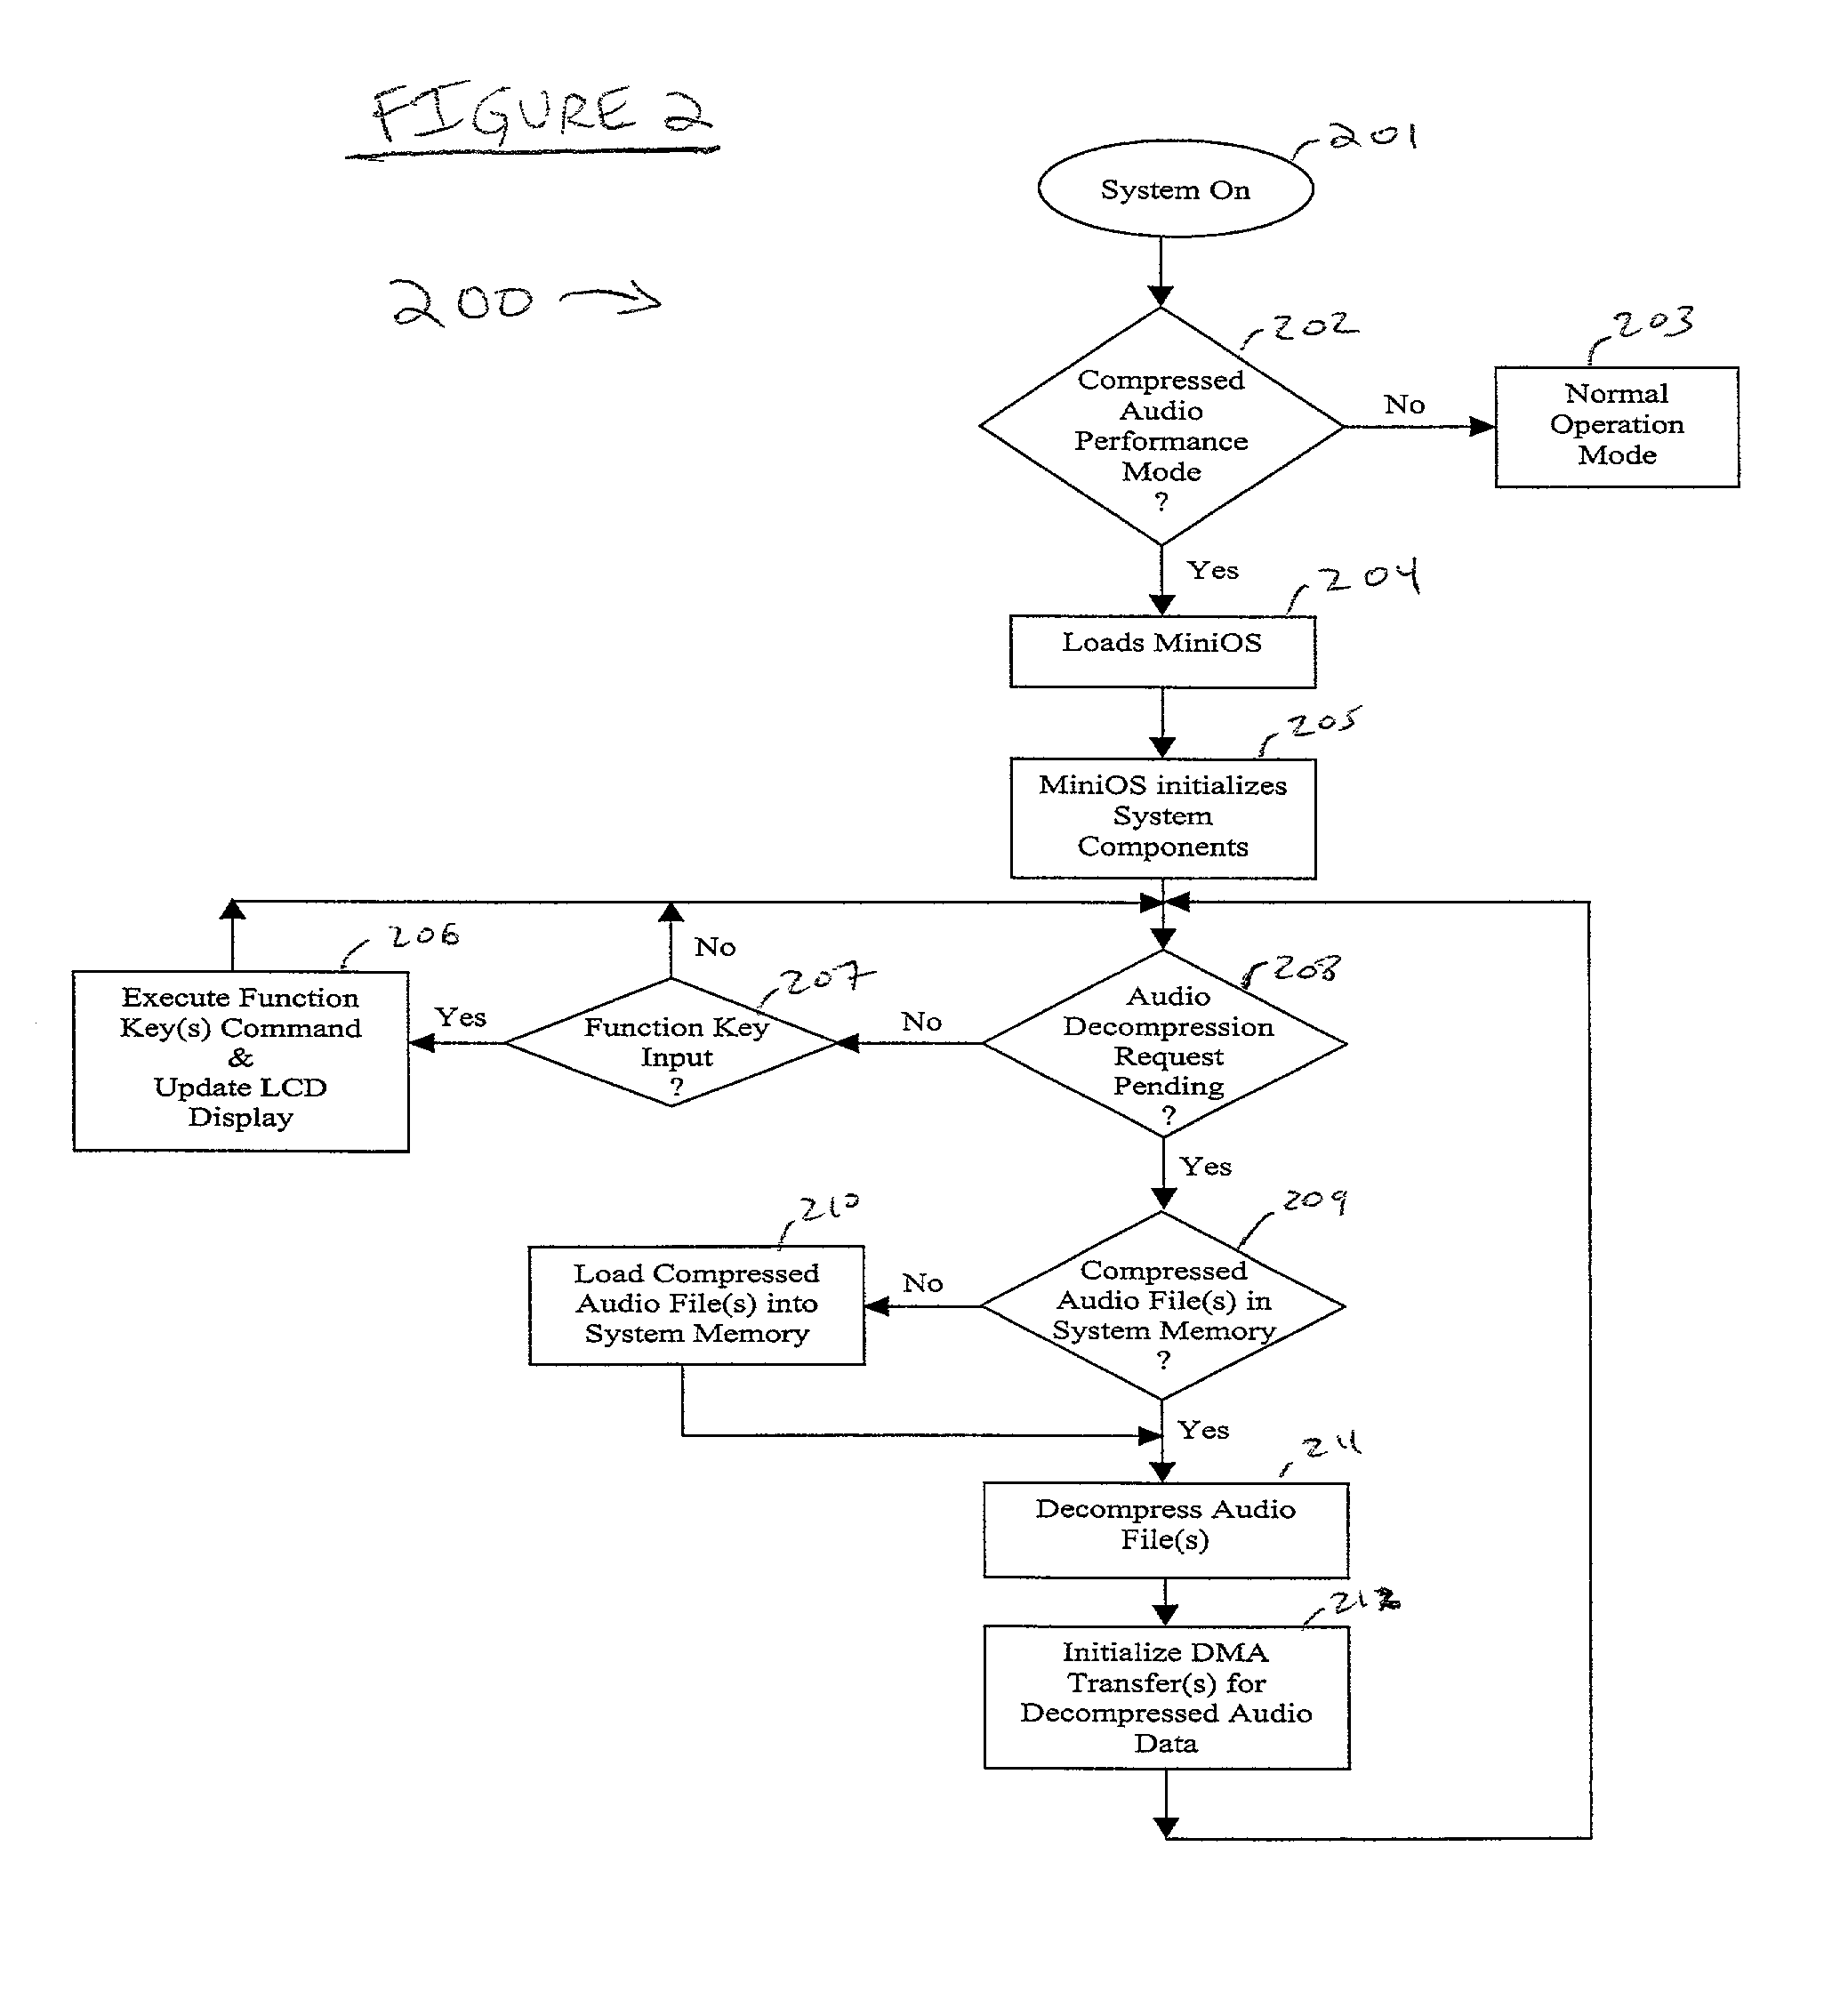 Low power digital audio decoding/playing system for computing devices